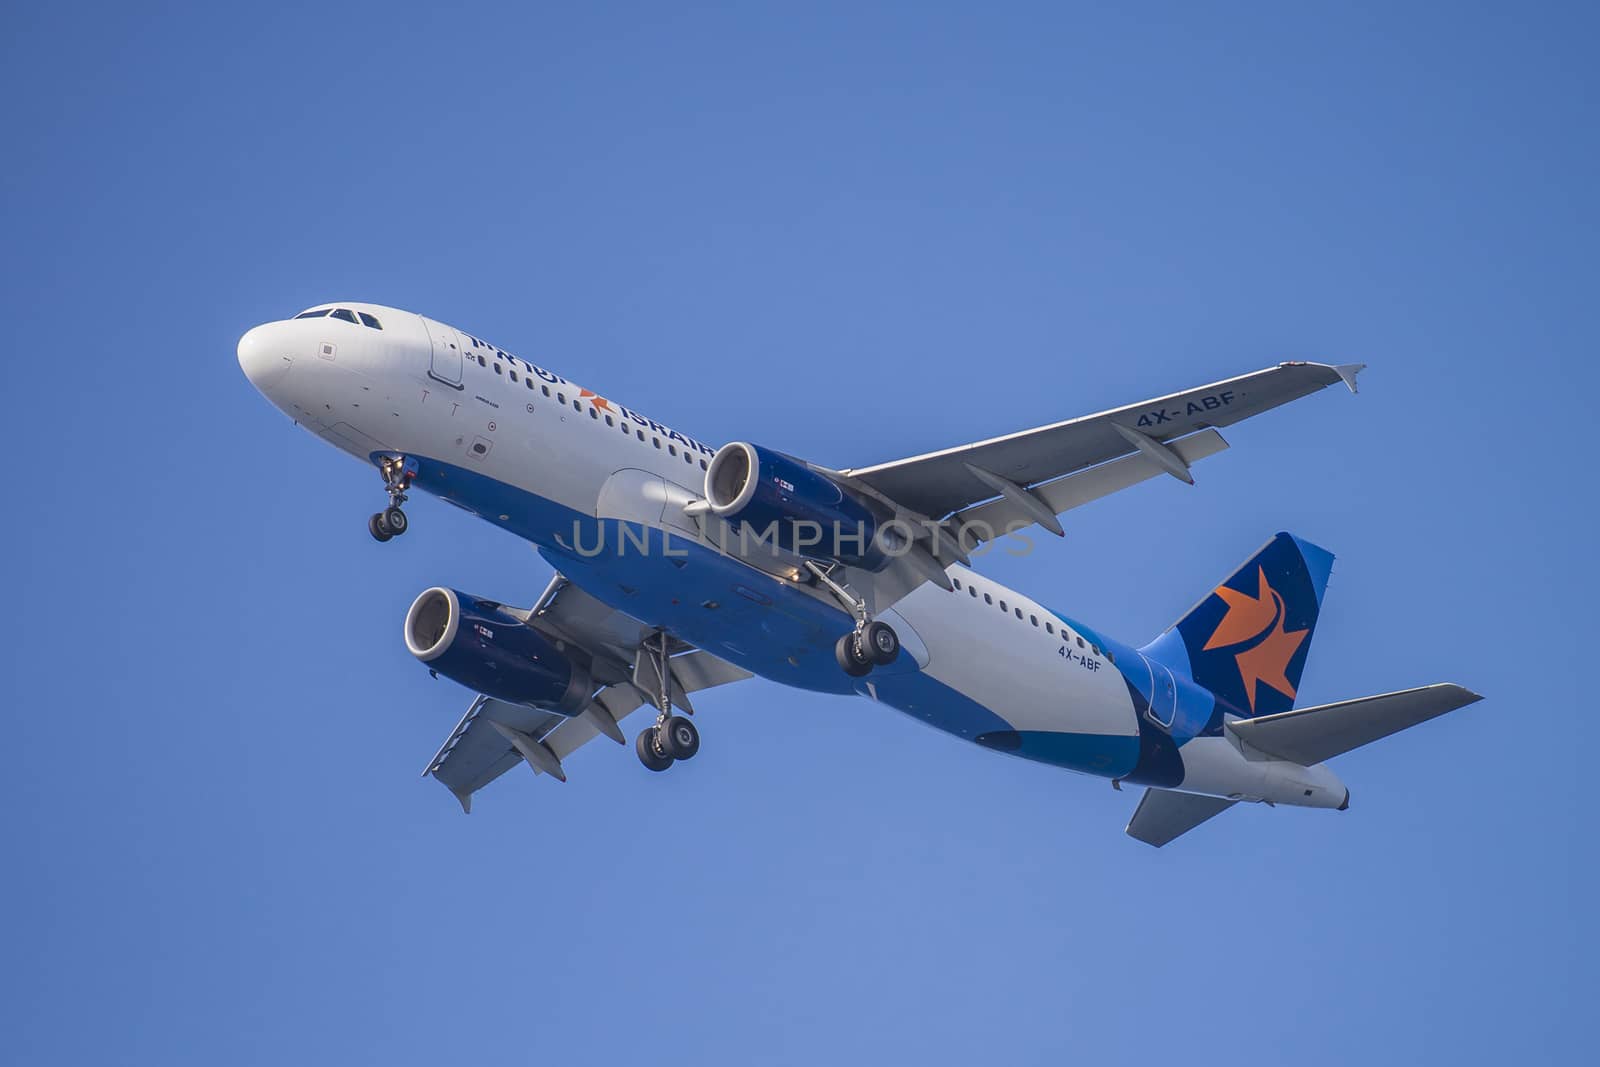 Israir airlines, Israel, Airbus a320-232. The pictures of the planes are shot very close an airport just before landing. September 2013.